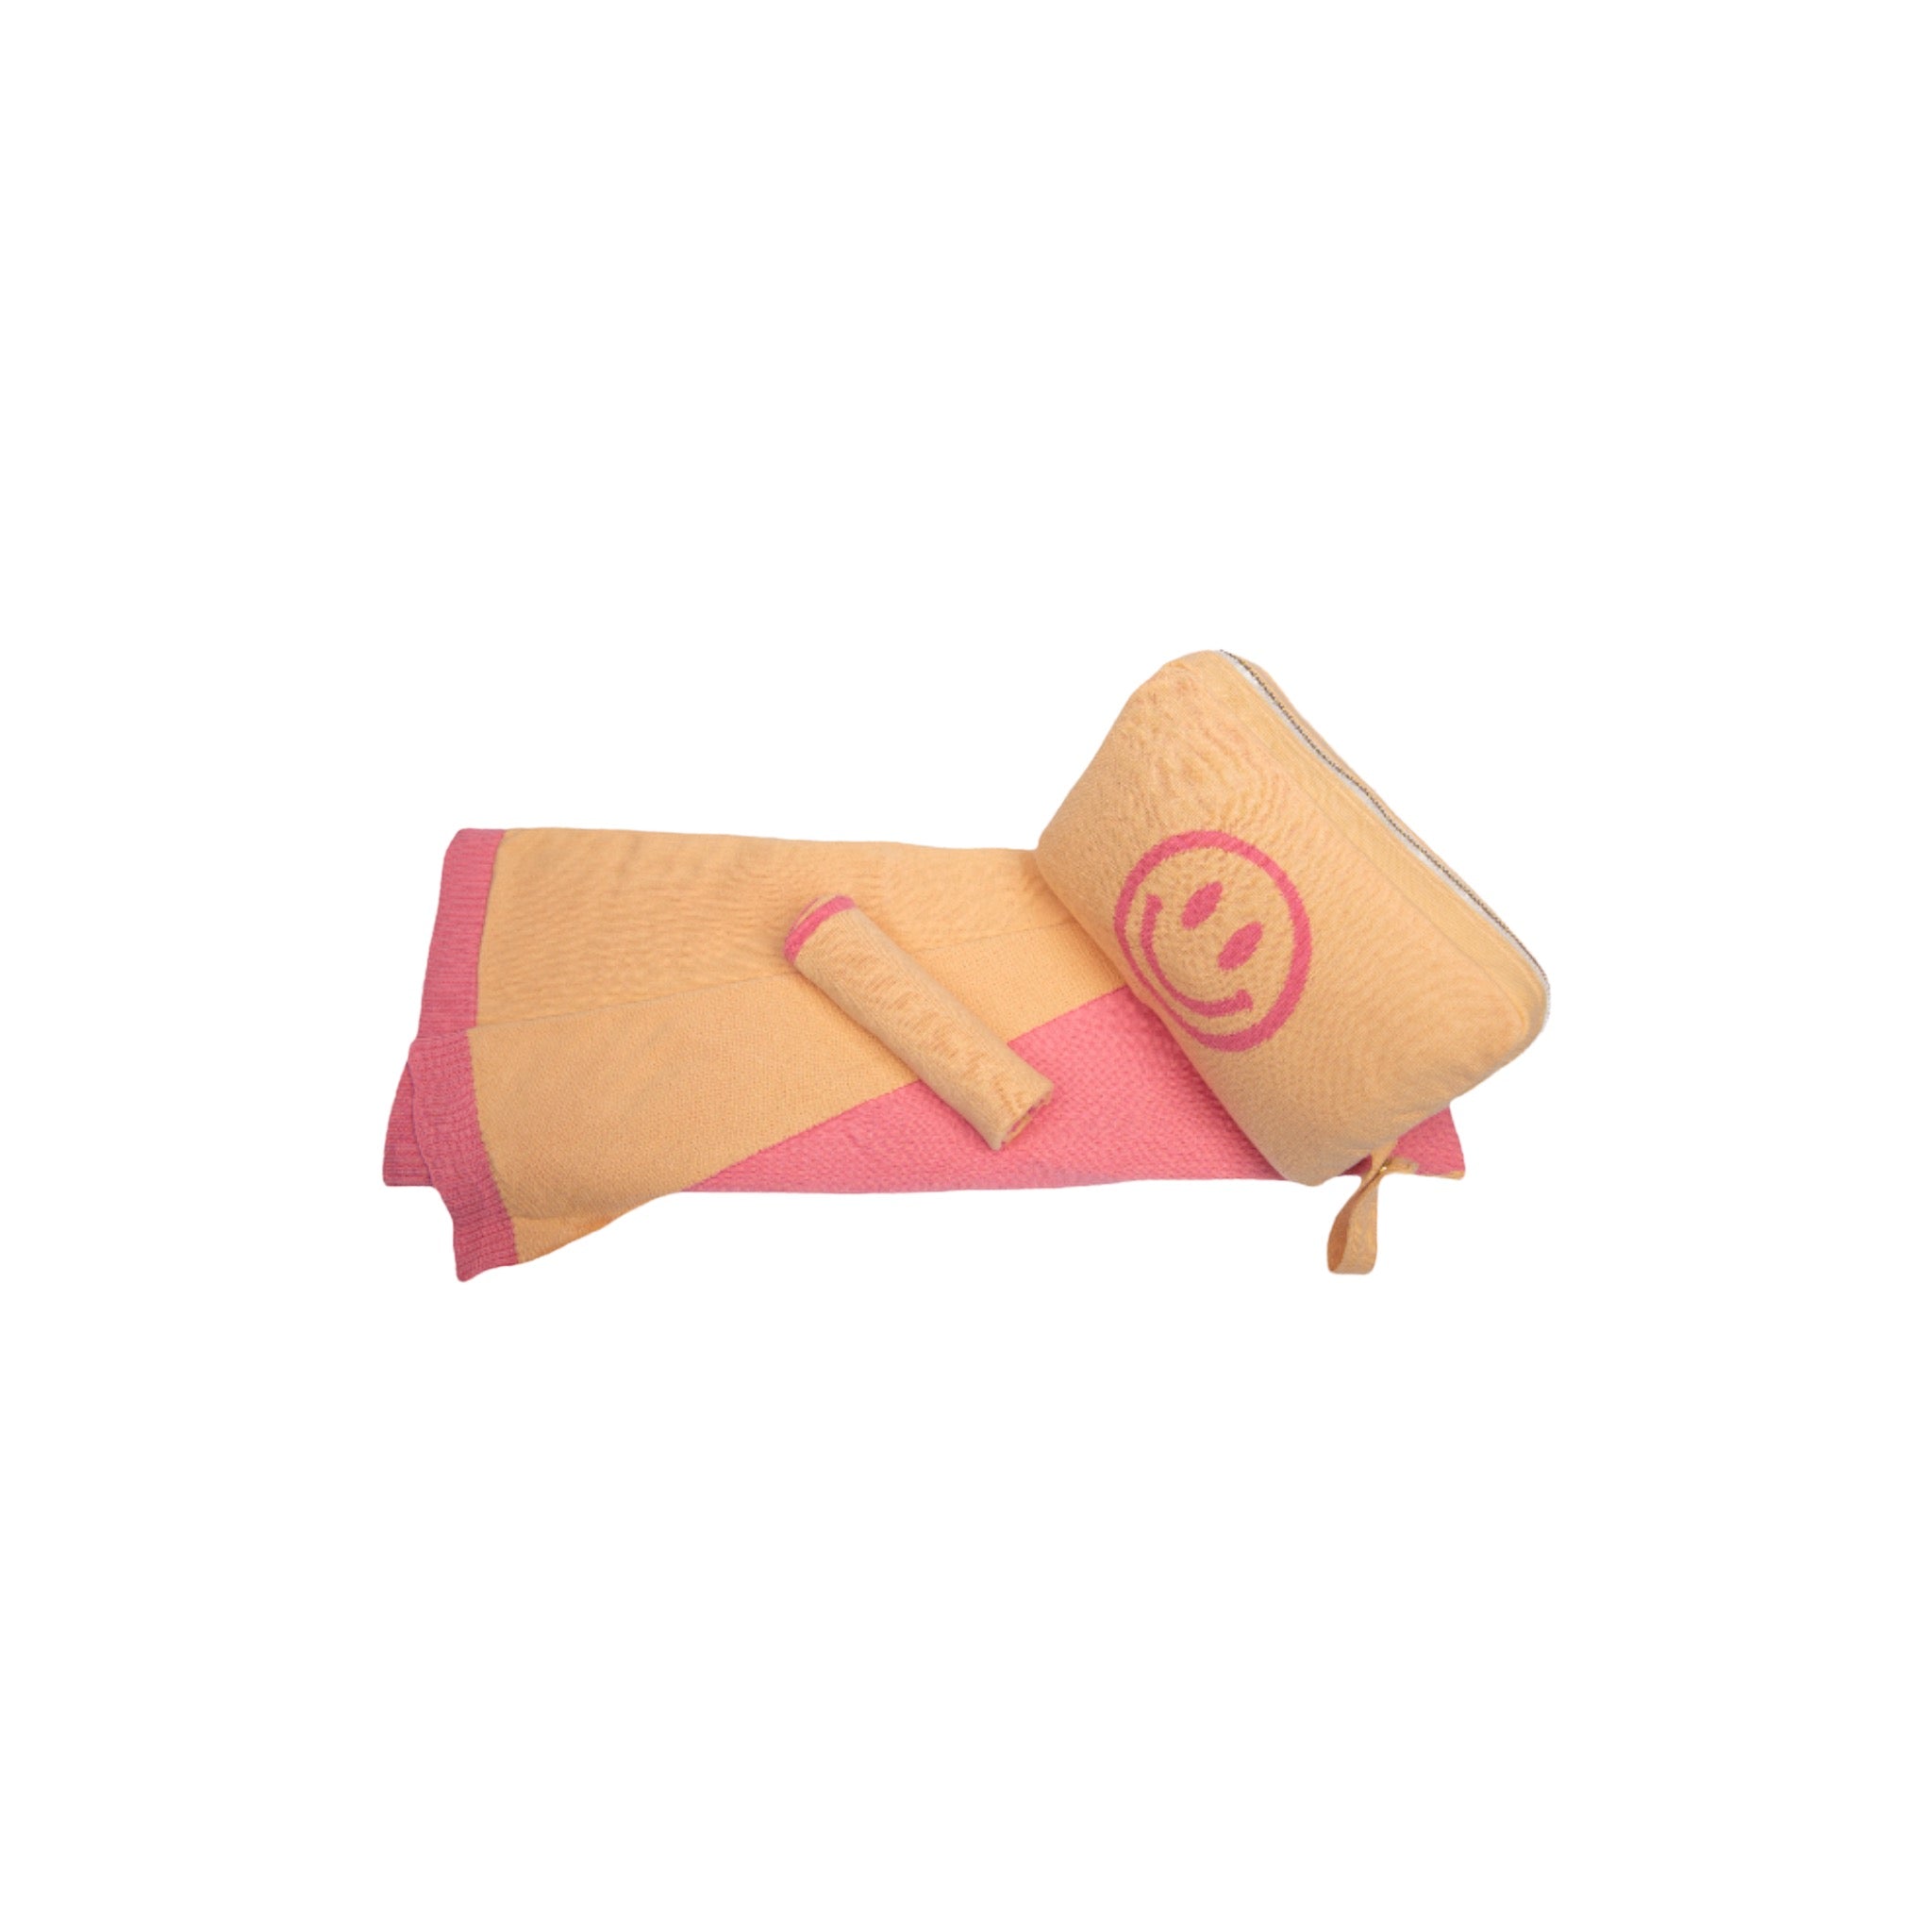 Smiley Clutter Pink/mud Yellow